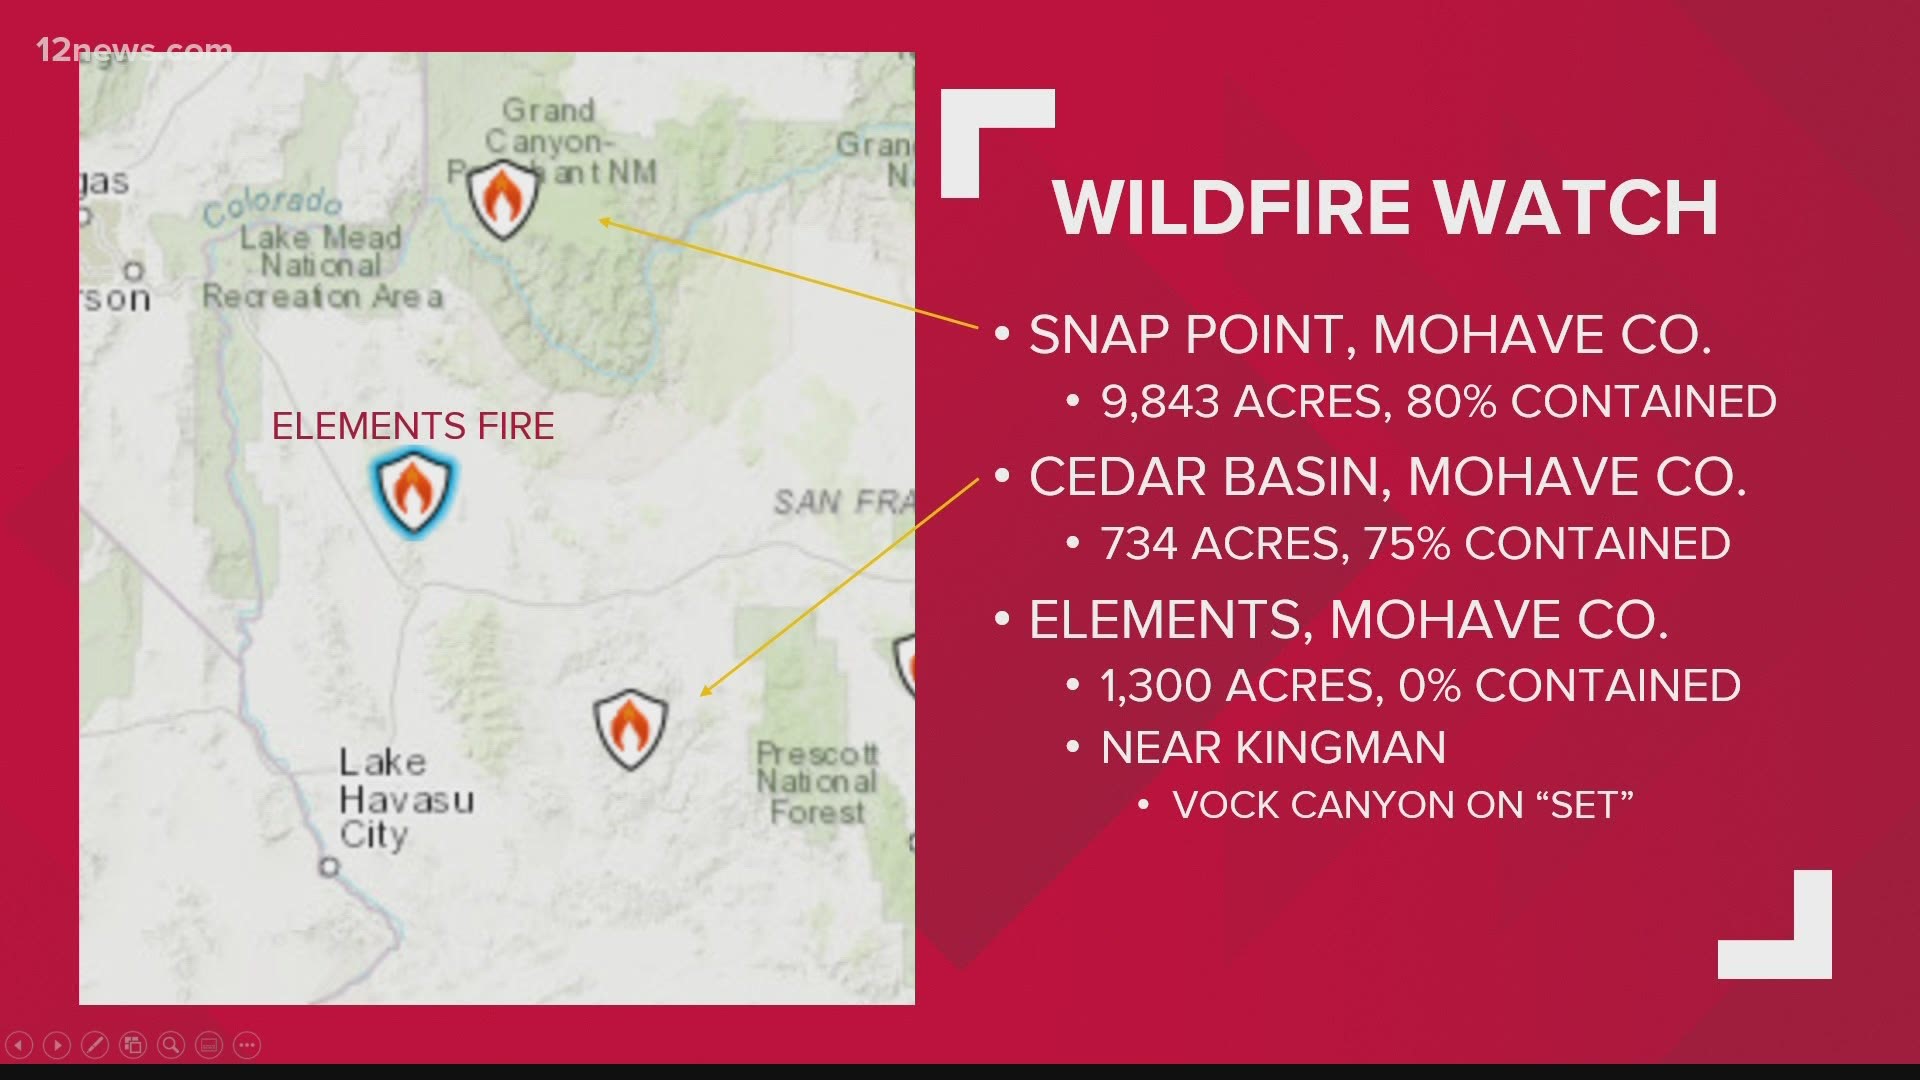 Here are the morning updates for firefighting efforts on the wildfires currently burning in Arizona on July 13, 2021.